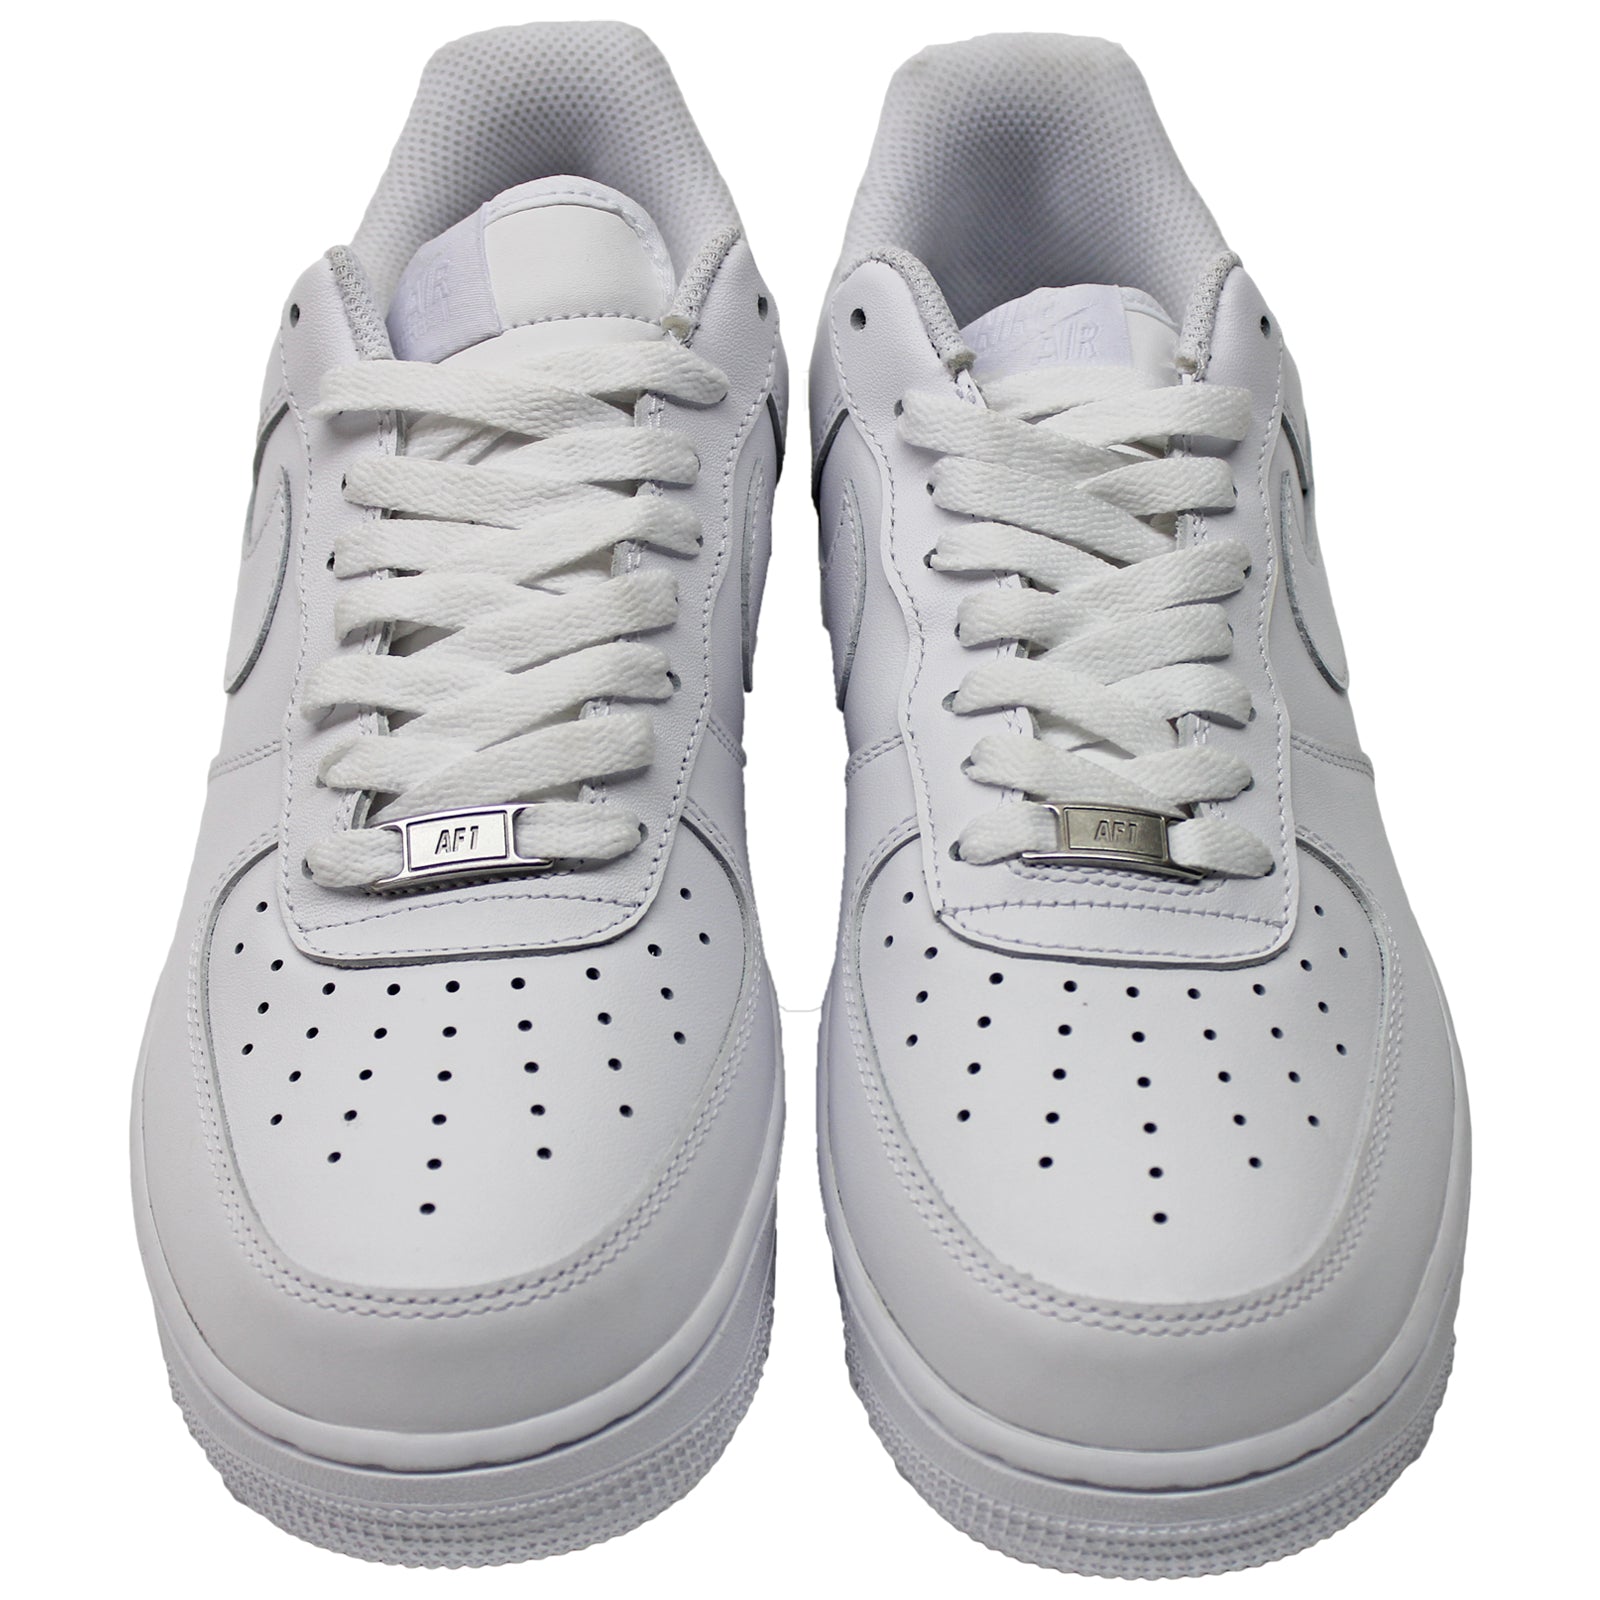 Nike Air Force I 07 White Lowtop Leather Mens Trainers - UK 9